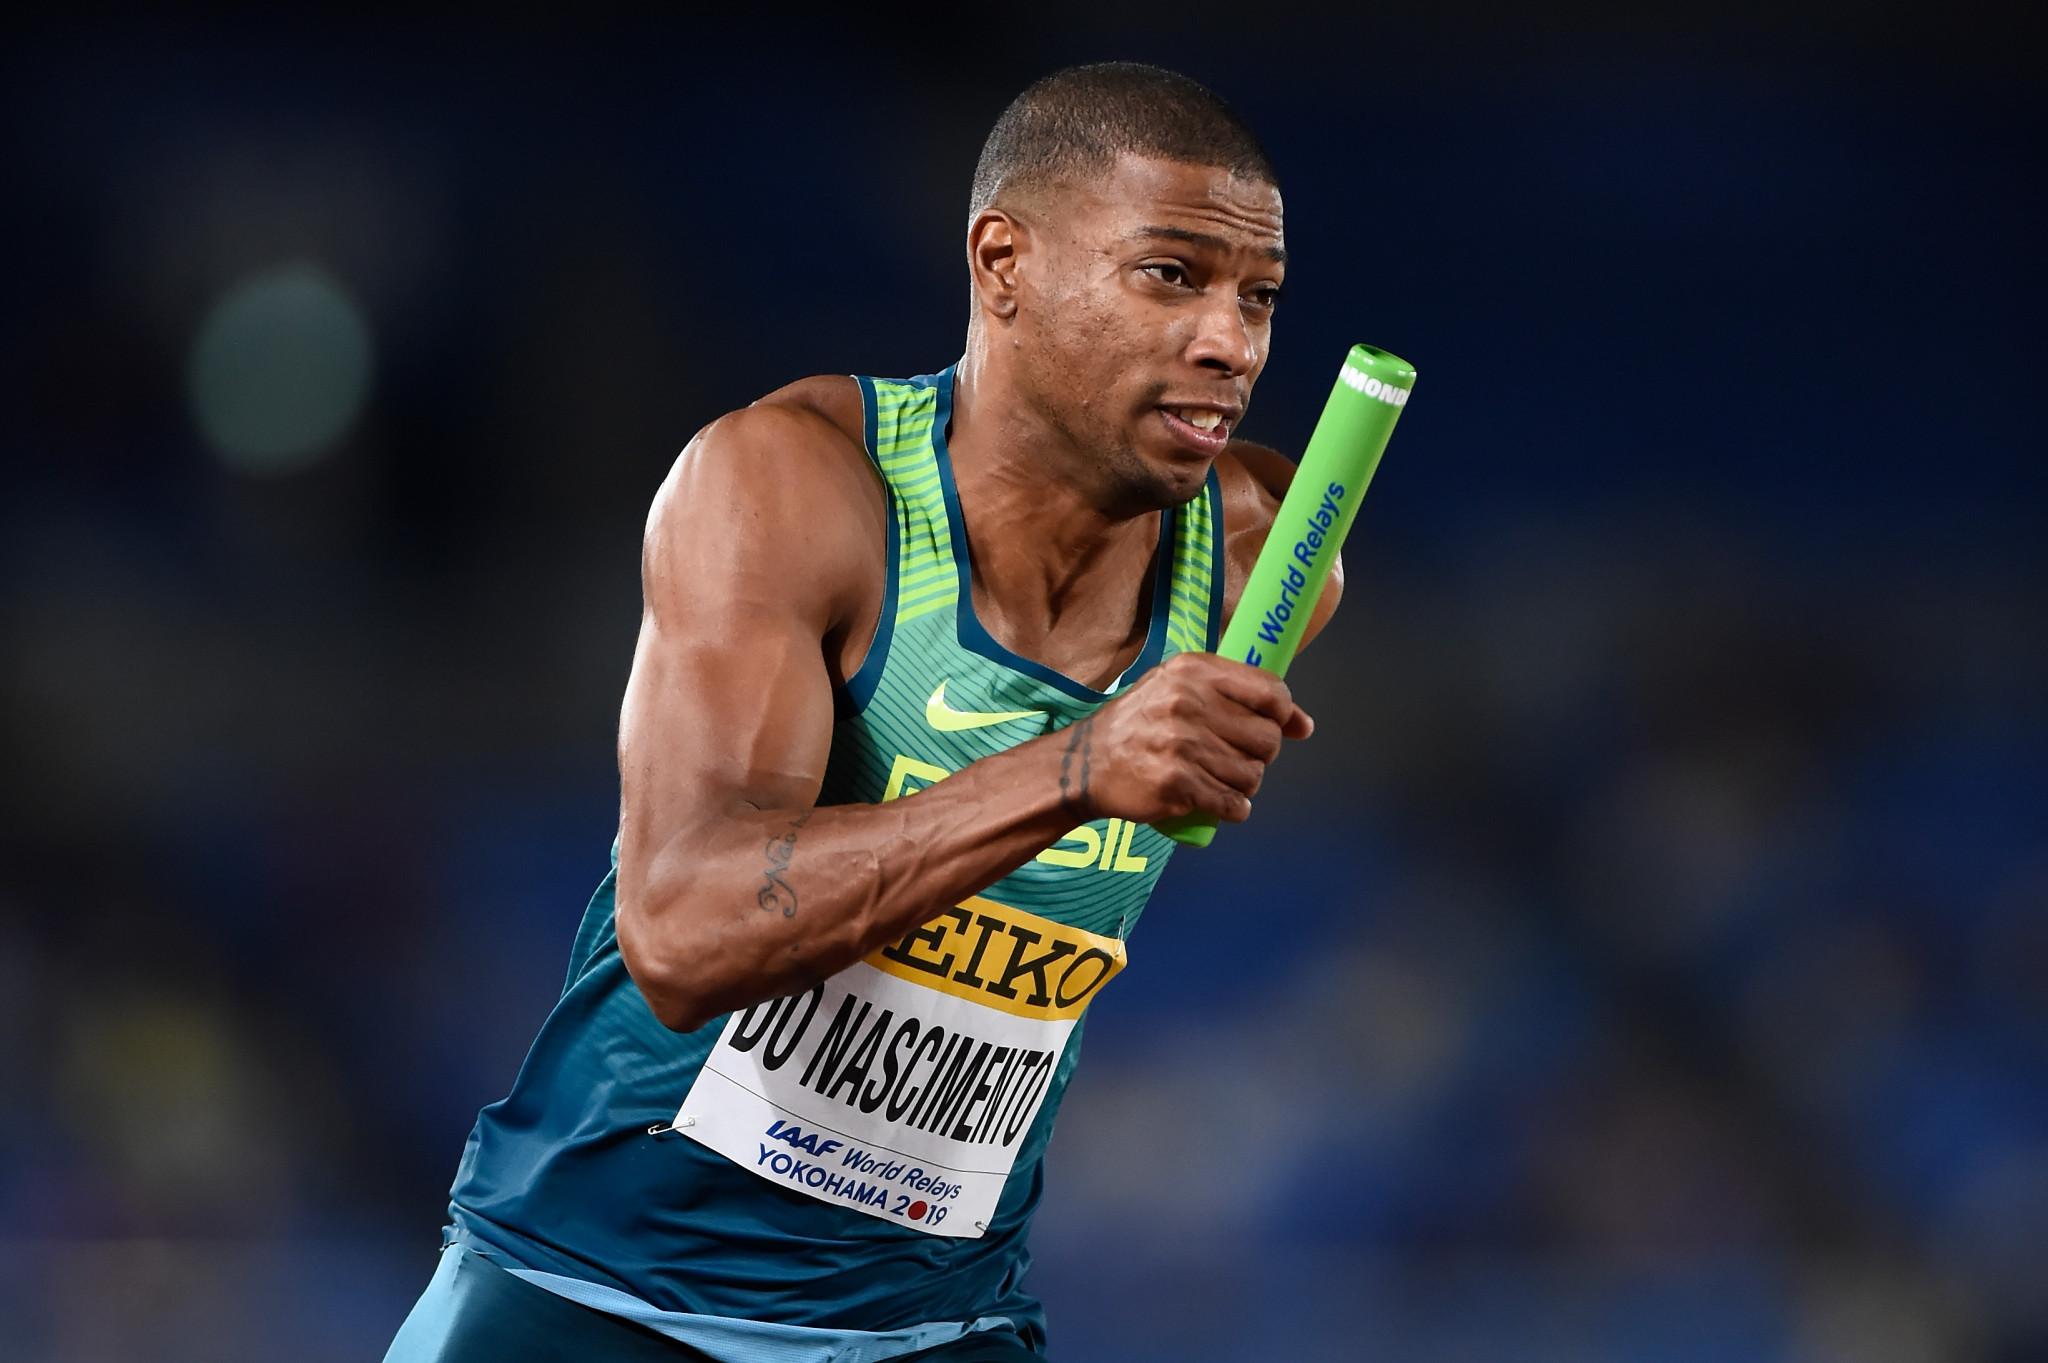 IAAF World Relays winner Rodrigo do Nascimento of Brazil won the 100m title at the Lima 2019 test event on the opening day of the South American Athletics Championships ©Getty Images